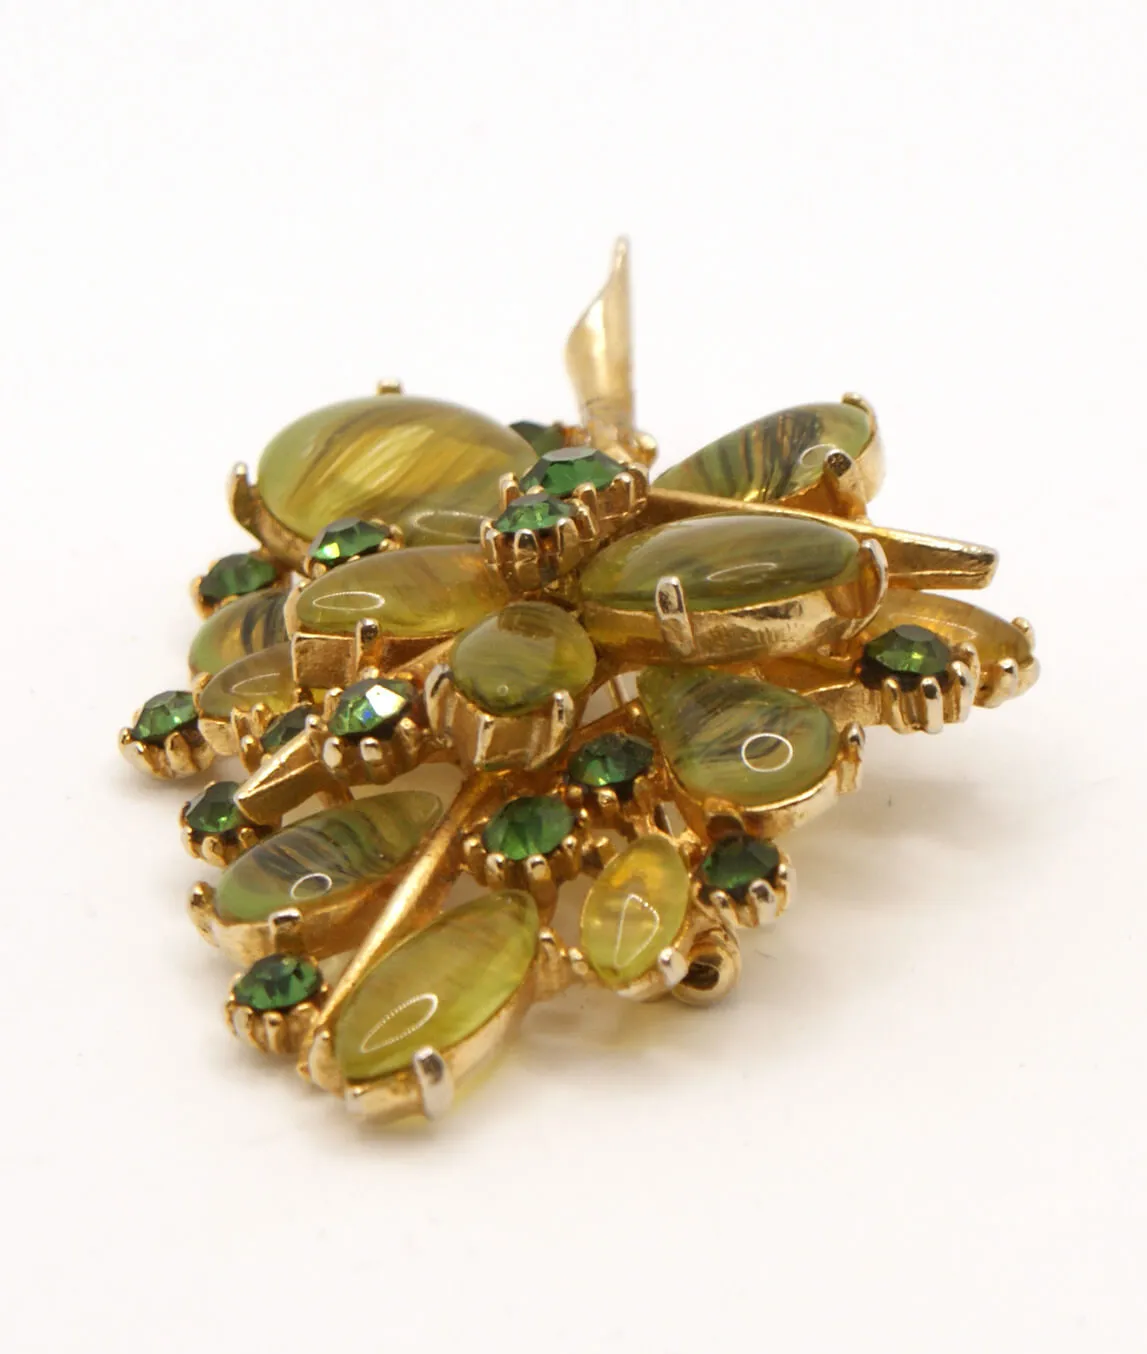 Vintage Arthur Pepper brooch with green stones